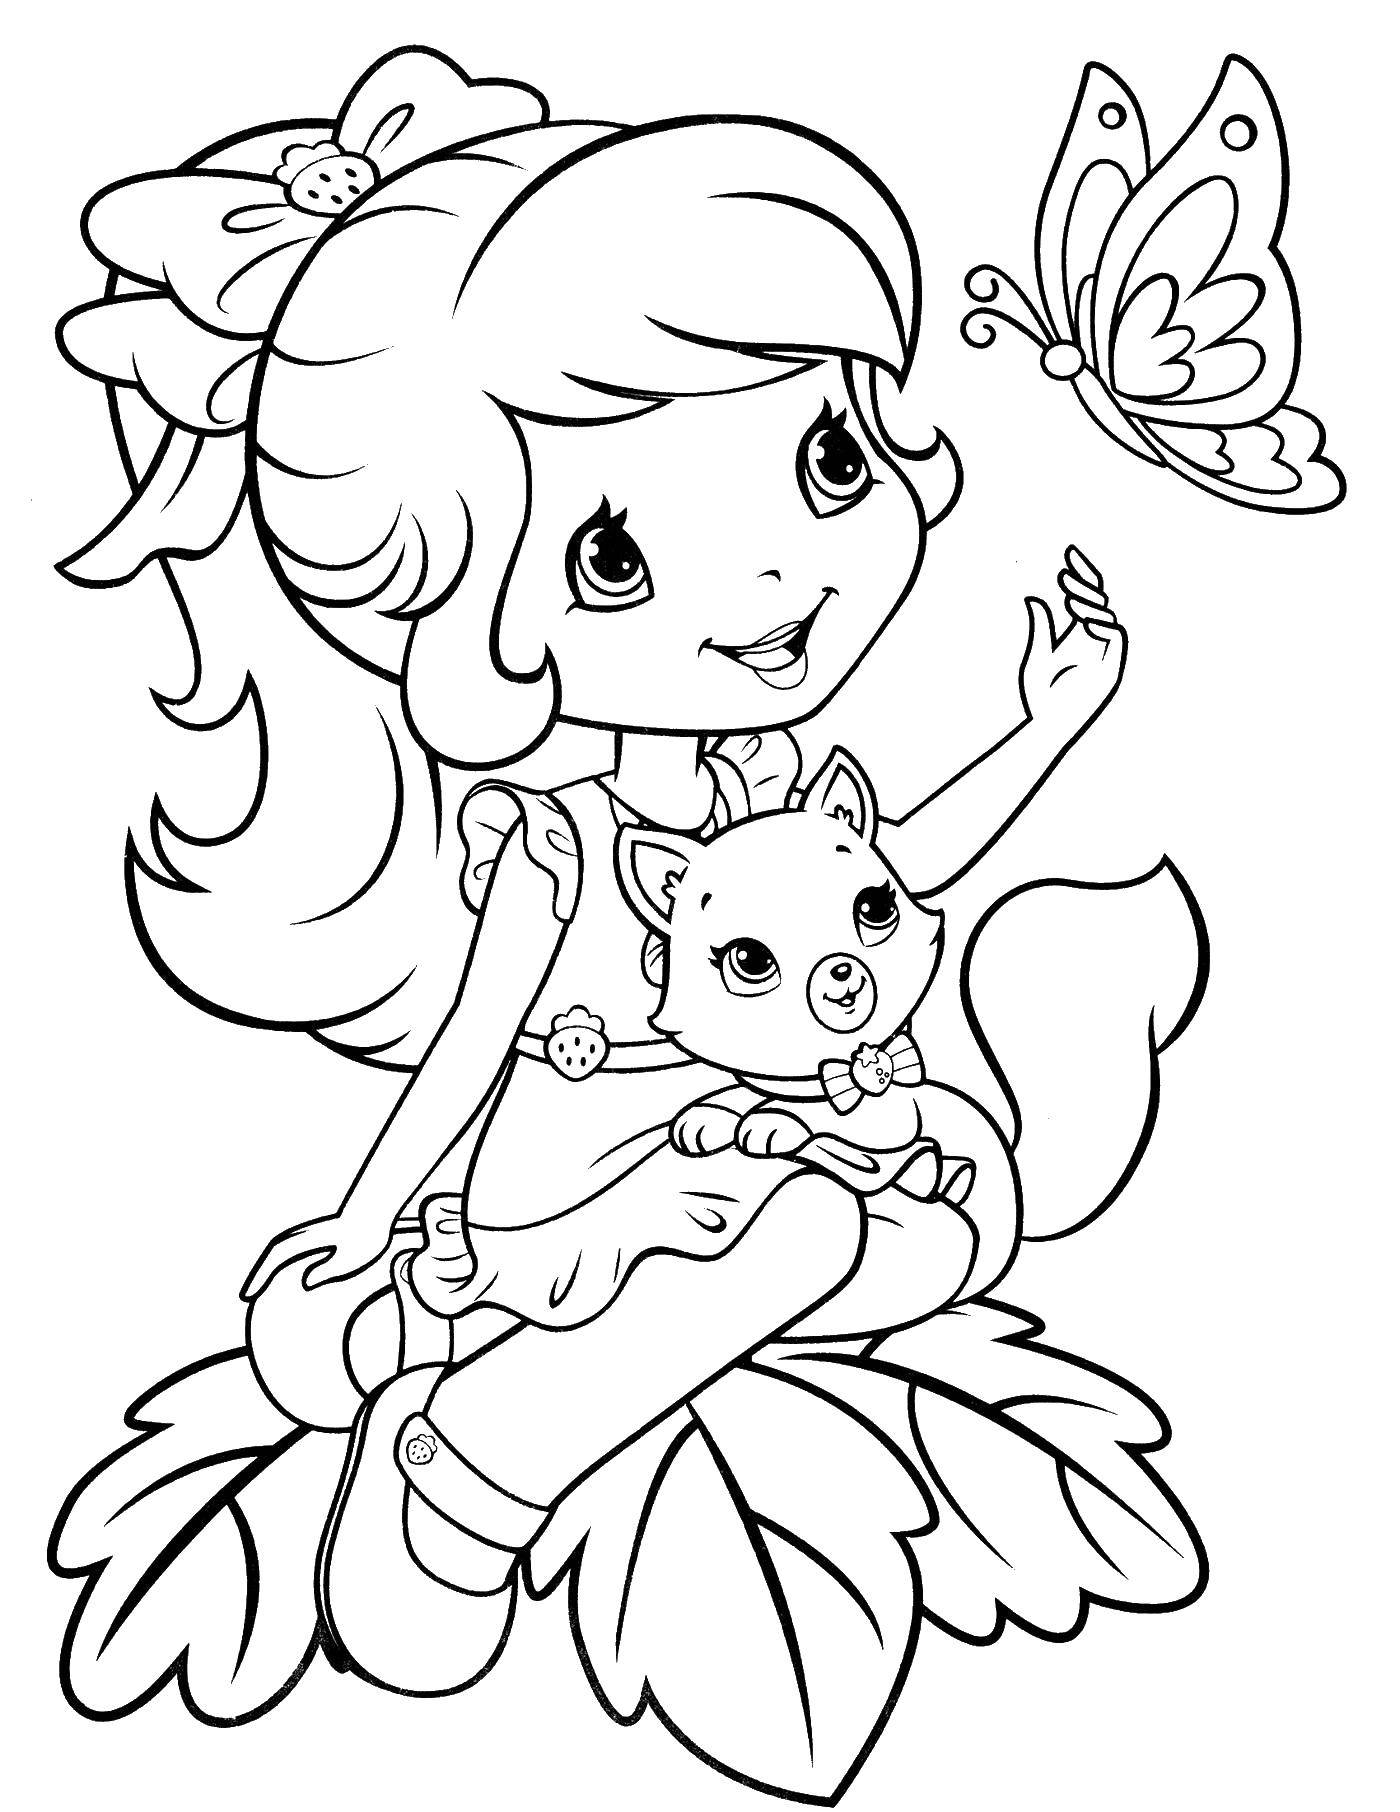 Coloring Girl with cat and butterfly. Category butterflies. Tags:  butterfly, girl.